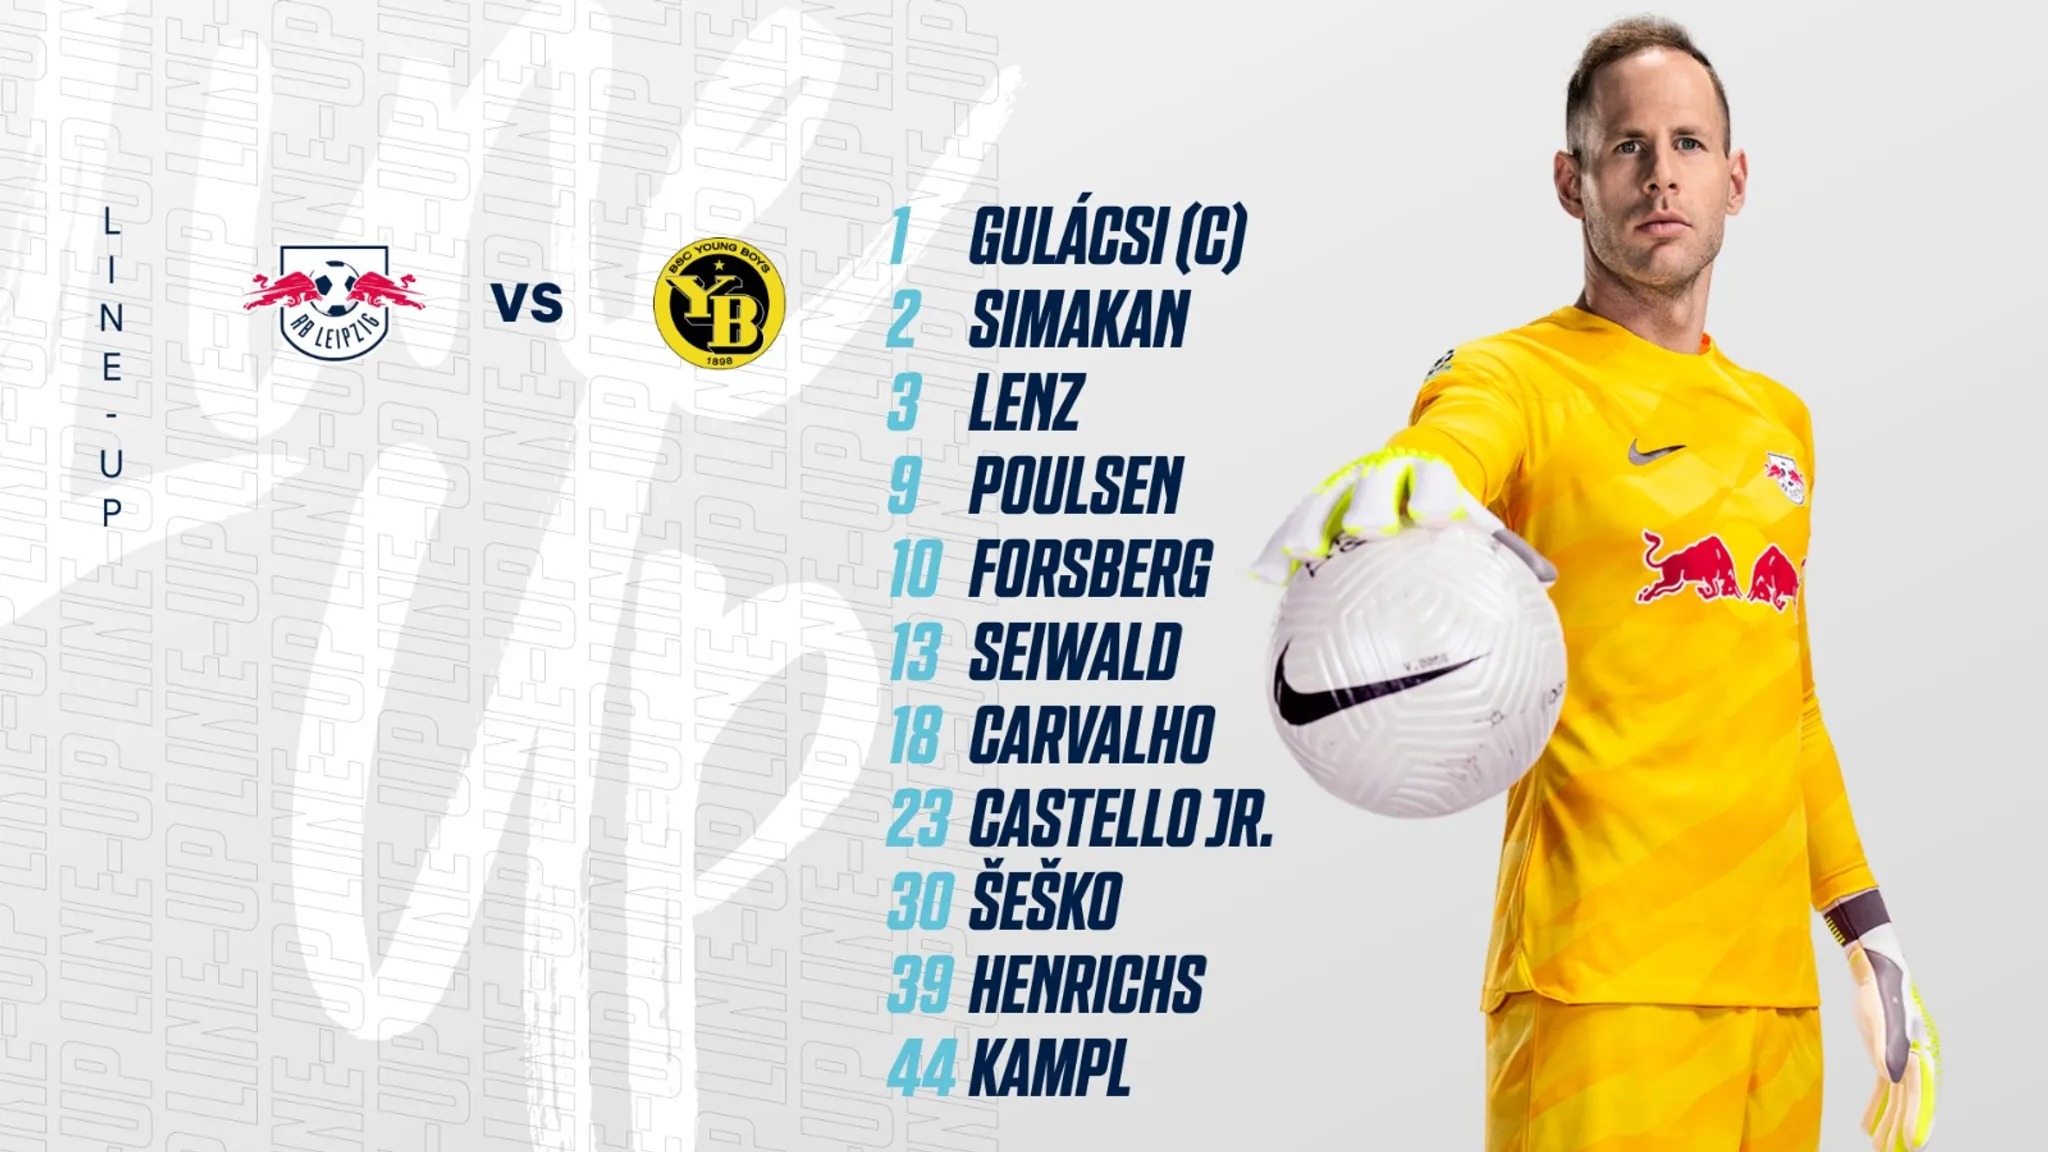 RBL's starting XI against Young Boys